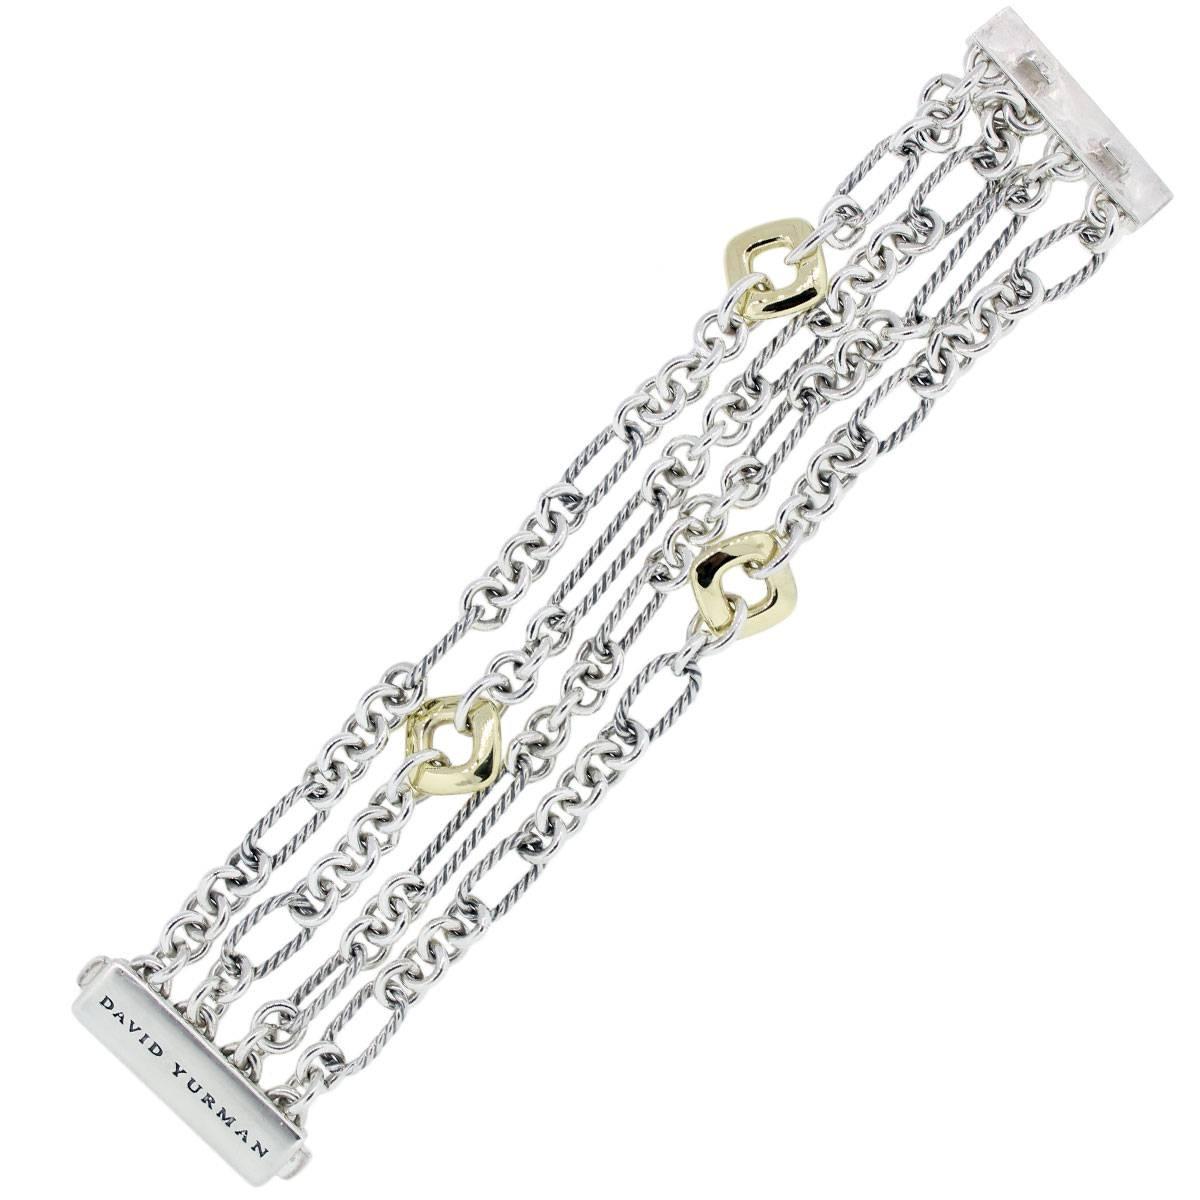 Brand: David Yurman
Material: Sterling Silver and 18k Yellow Gold
Total Weight: 88.3g (56.8dwt)
Measurements: 7.25